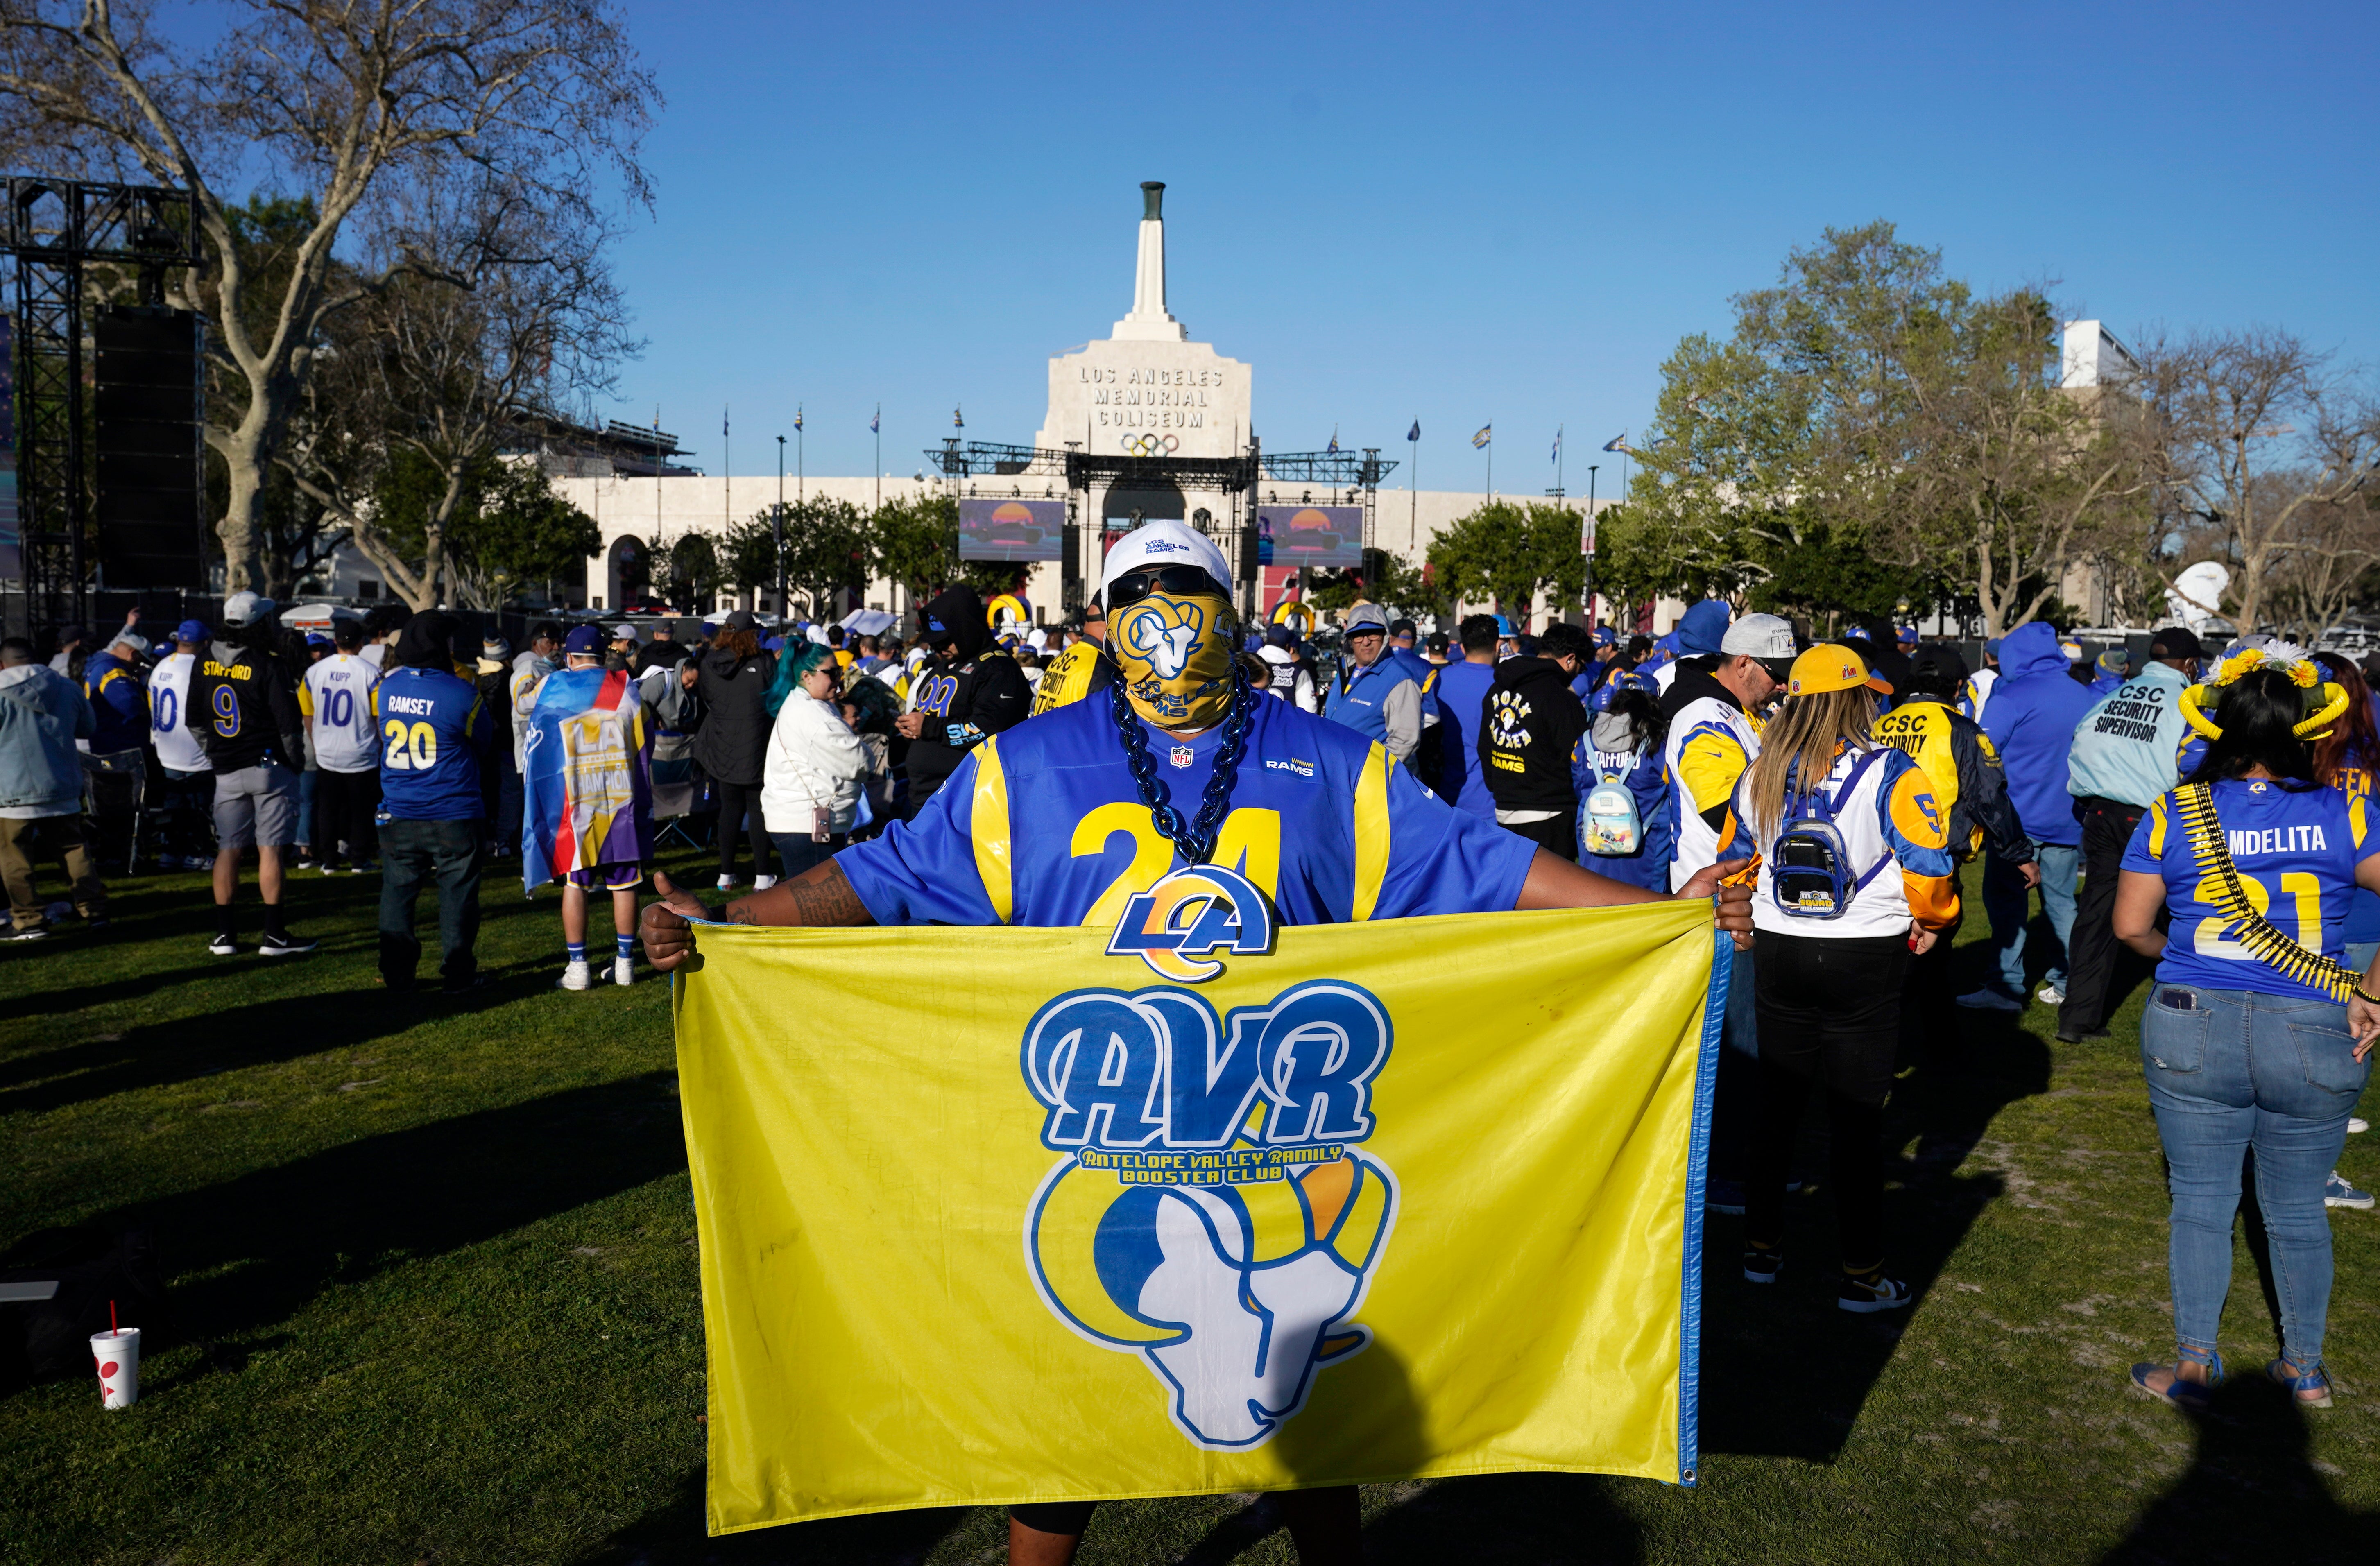 The L.A. Rams Super Bowl parade is this week. Here's what you need to know.